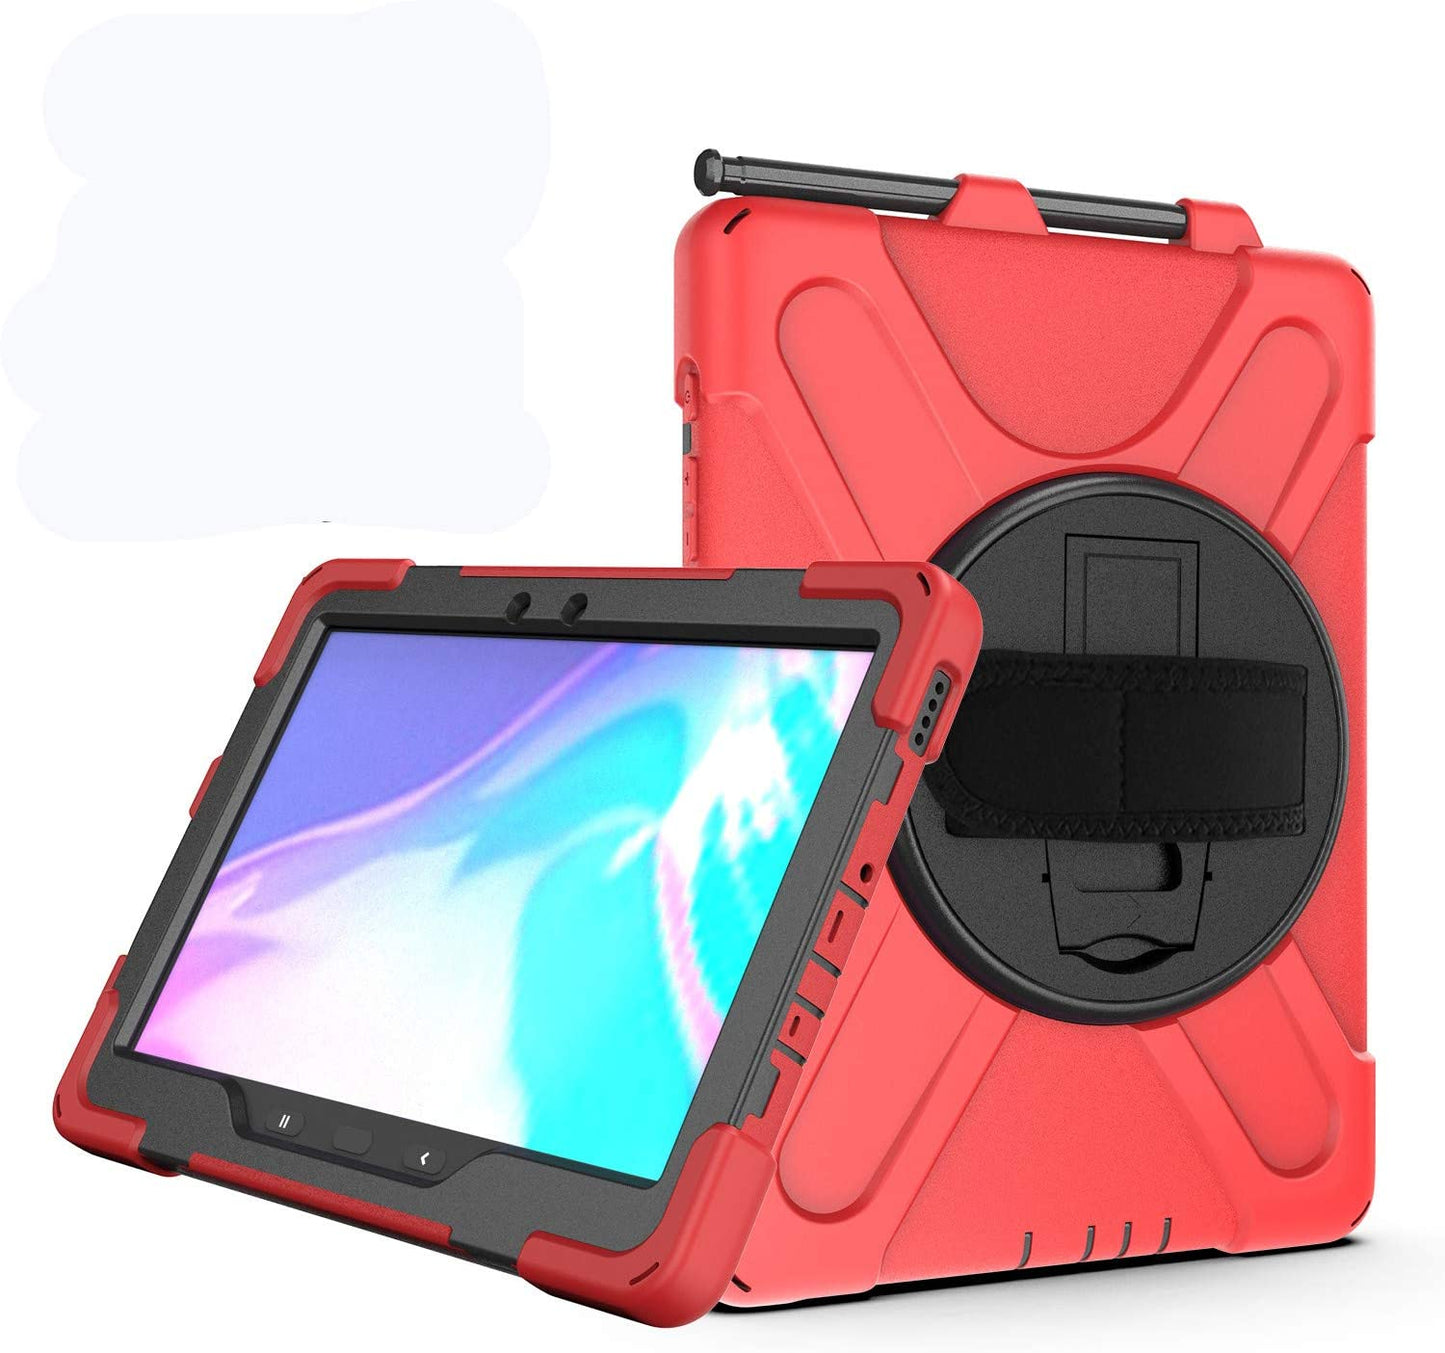 Case for Samsung Galaxy Tab Active Pro 10.1 T540 T545 T547, Military Grade [15 ft Drop Tested] Full-Body Shockproof Protective Cover with 360? Rotation Stand, Hand Strap & Pencil Holder (Black)